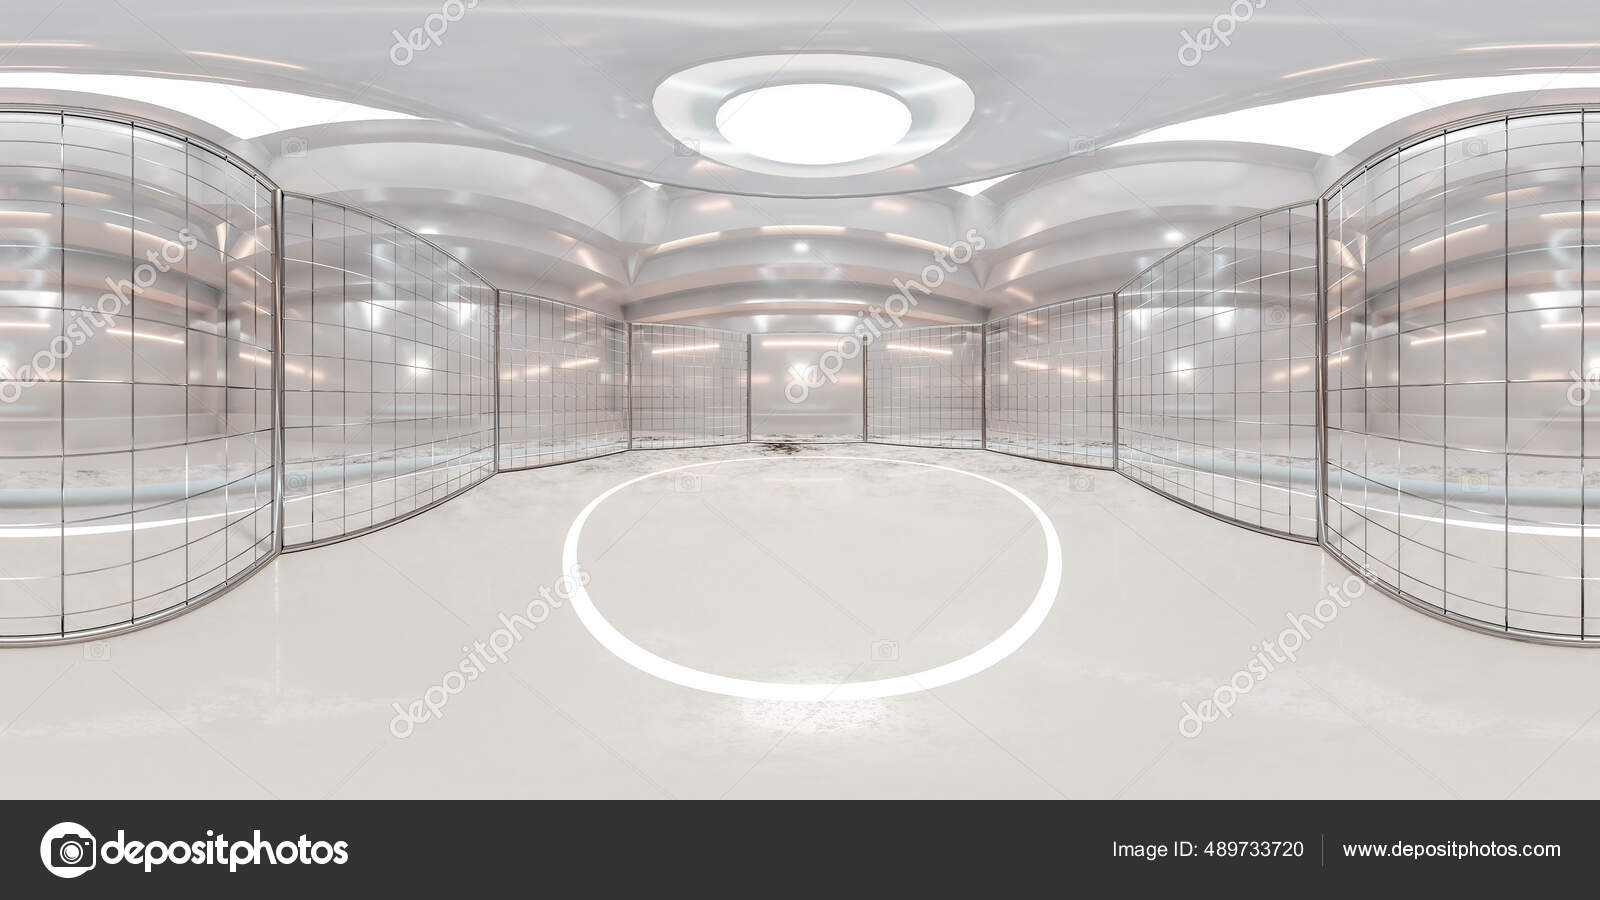 Full 360 degree panorama virtual environment map of mma cage in industrial hall 3d render illustration hdri hdr vr style Stock Photo by ©eliahinsomnia 489733720